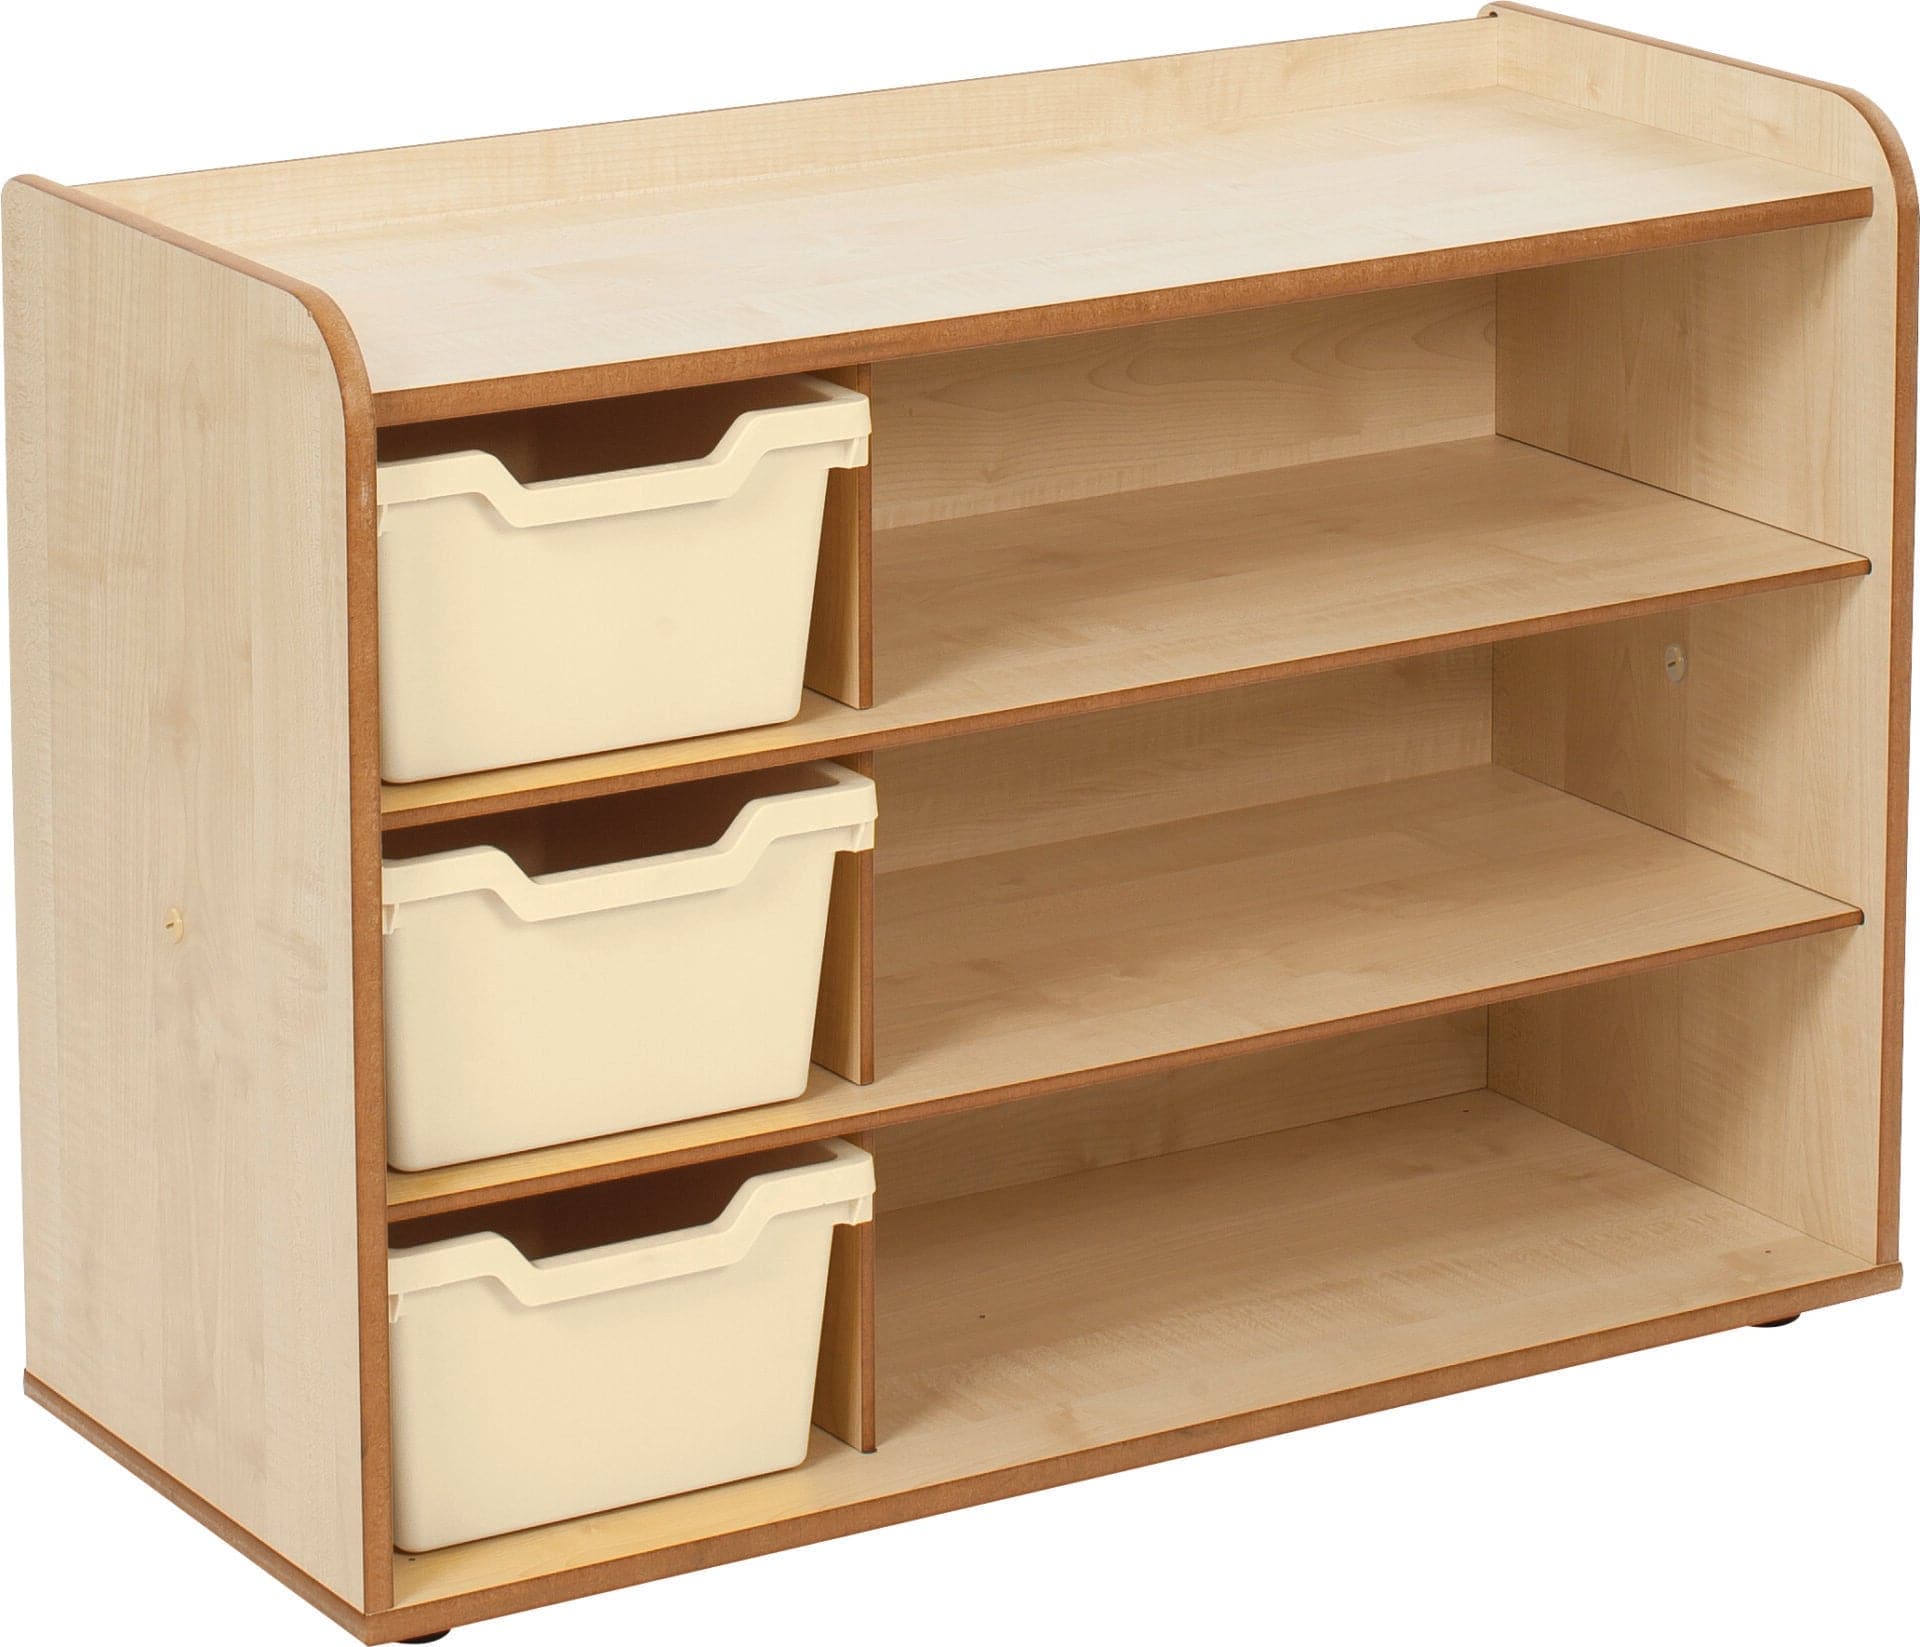 3 Tray Unit with Shelves and Magnolia Trays, The Solway range includes a quality selection of play, reading and tray storage units. Every 3 Tray Unit with Shelves and Magnolia Tray unit comes with connectors so they can be attached together. The 3 Tray Unit with Shelves and Magnolia Trays are designed to be easily accessible, safe and to encourage independence. 3 Tray Unit with Shelves and Magnolia Trays 15mm Covered MDF – ISO 22196 certified antibacterial. Can be free standing or joined to other units in t